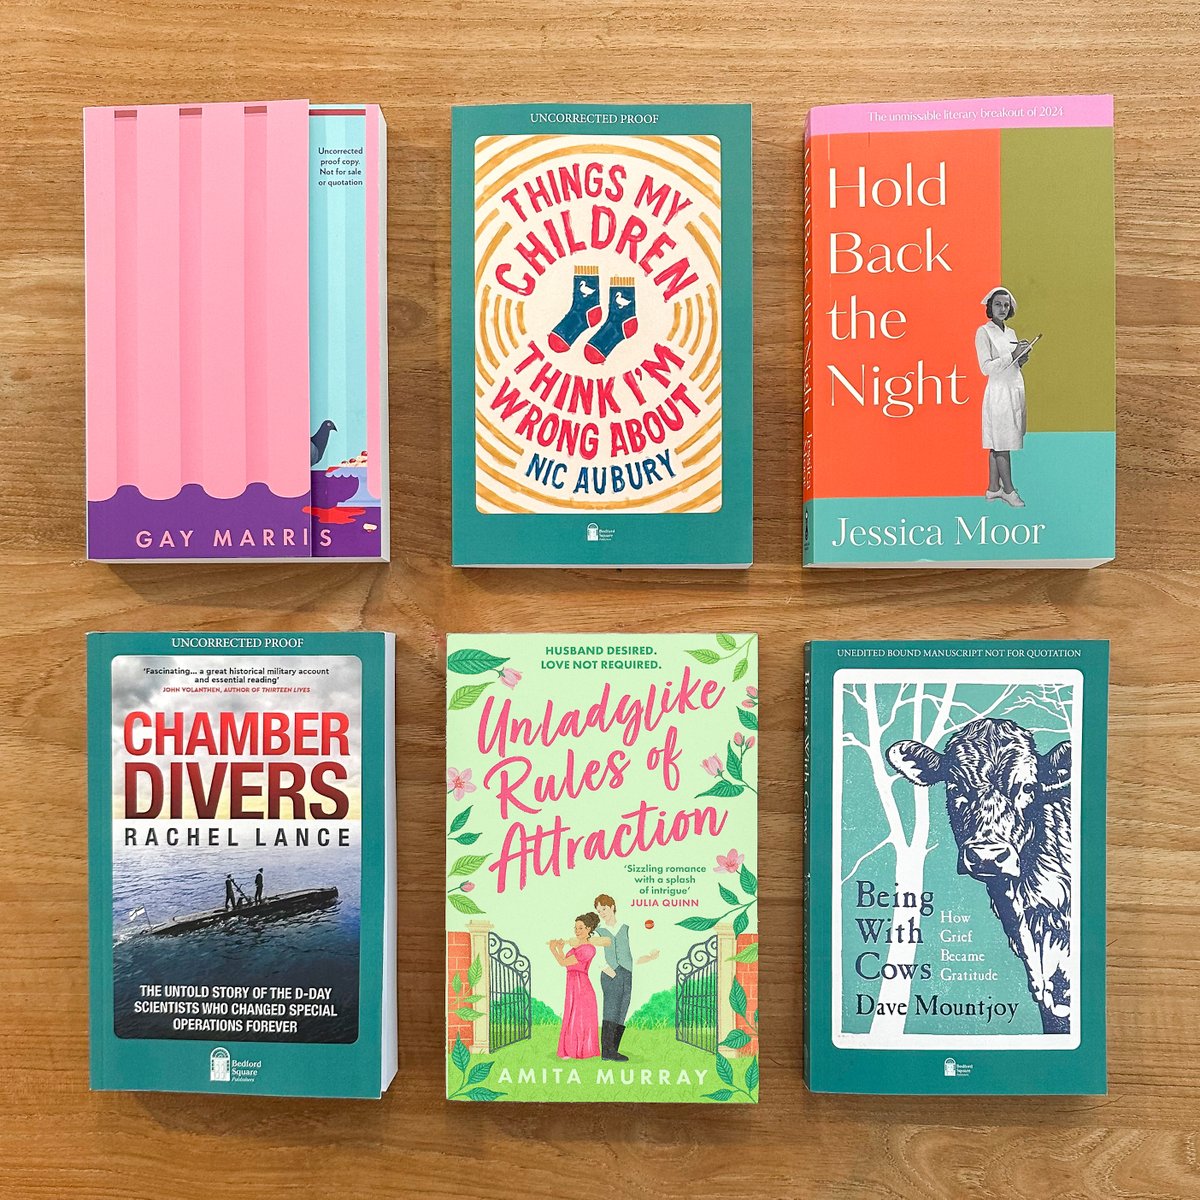 We don't judge books by their covers, but we're excited to show off these gorgeous titles that will be hitting shelves in May and June! From captivating fiction to insightful non-fiction, we're proud to work on such an incredible range of books👏 Which are already on your TBR?